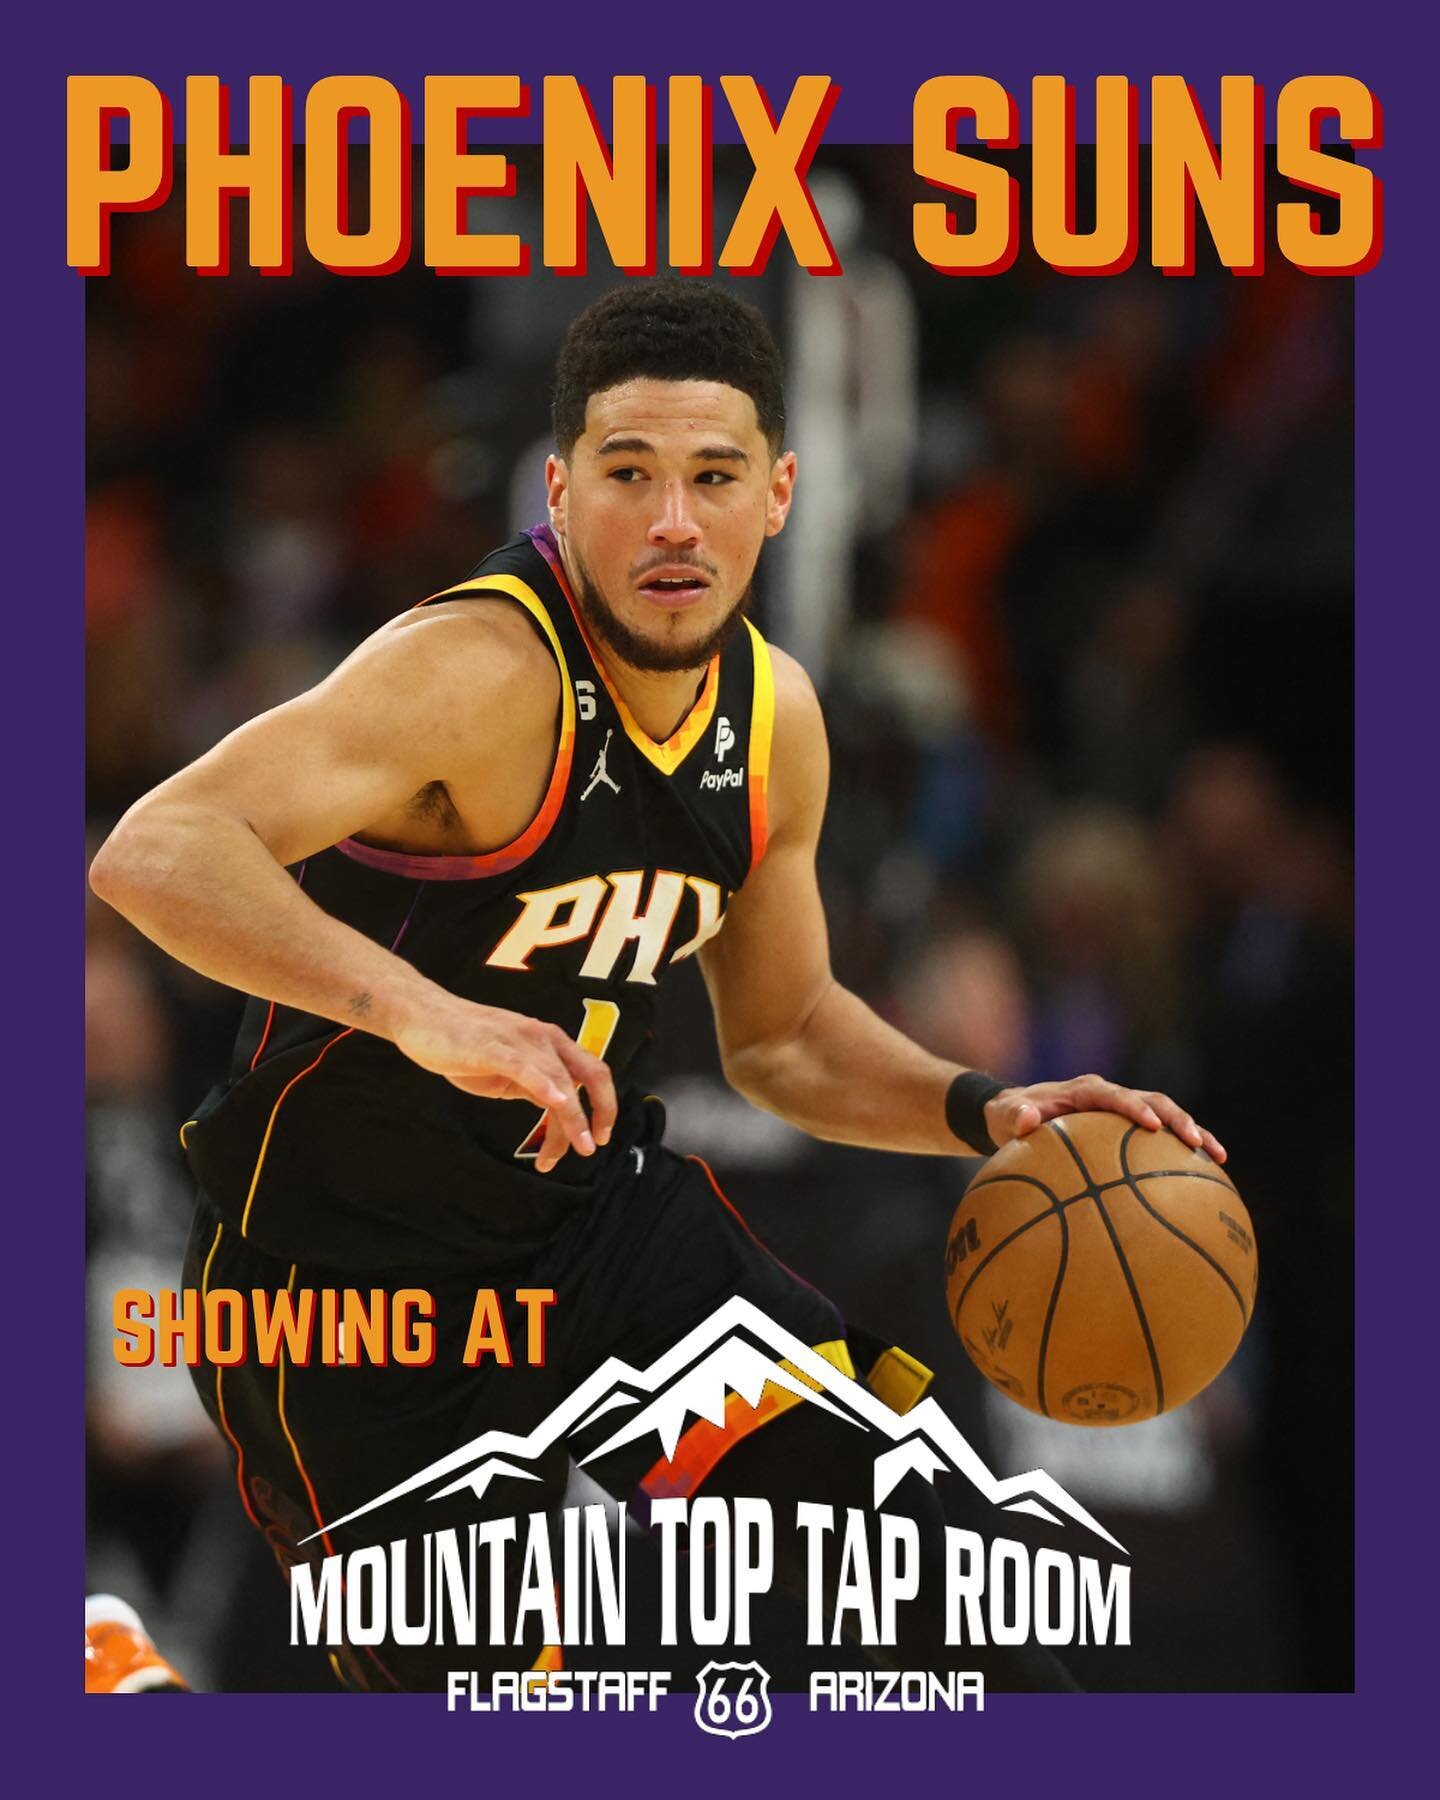 ☀️We are showing the Suns games!! Come cheer on your favorite team over a cold pint 🍻